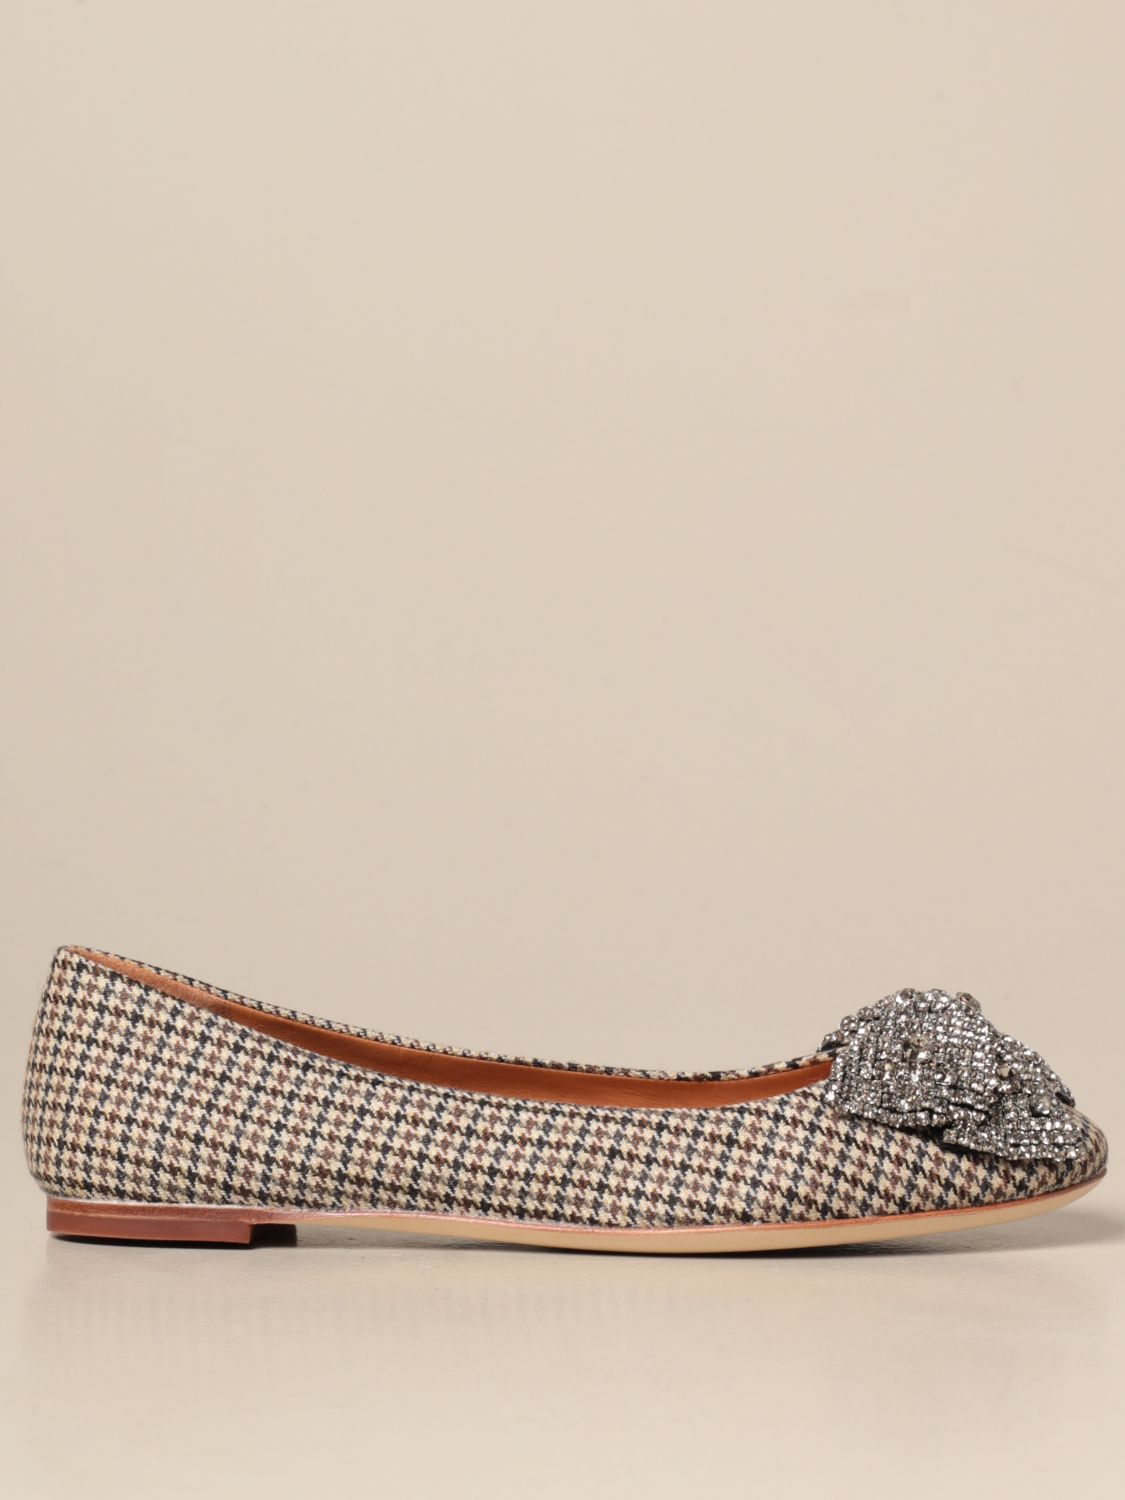 TORY BURCH: houndstooth ballerina with crystal bow - Natural | Tory Burch  ballet flats 76542 online on 